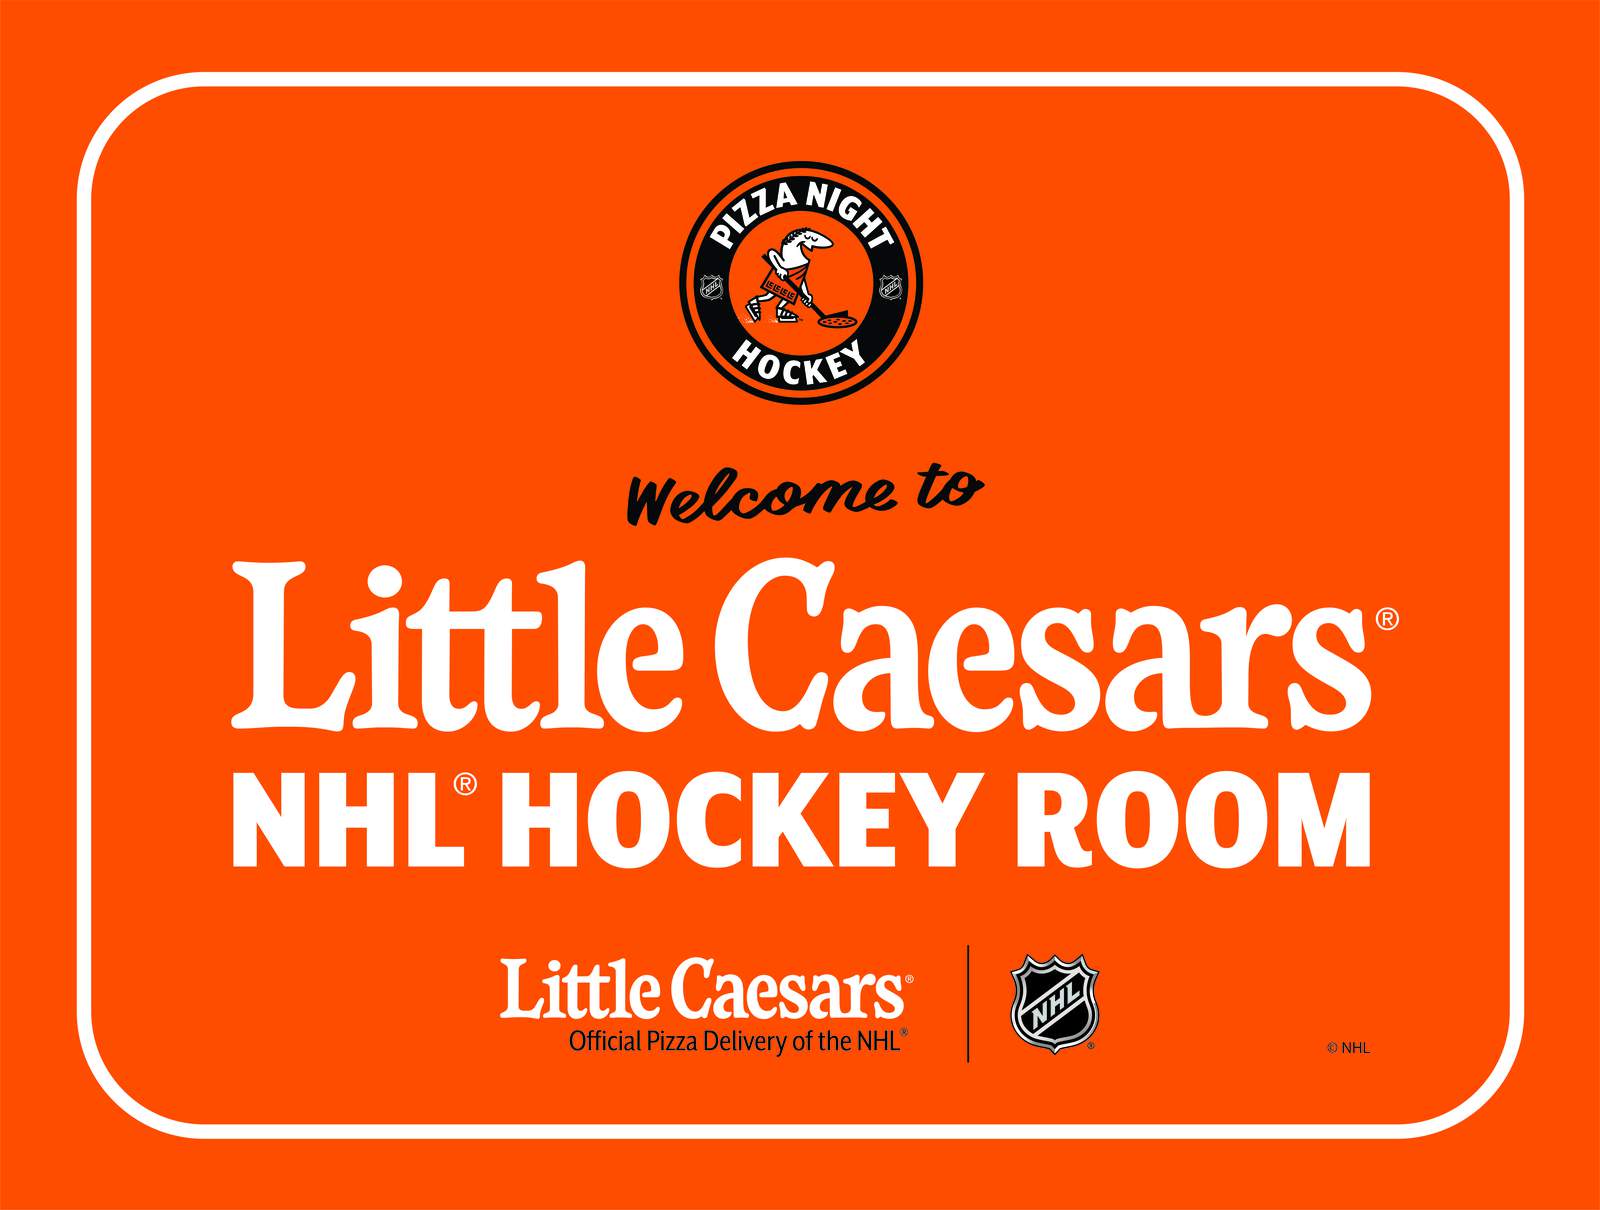 Little Caesars will buy naming rights to your hockey viewing room, give you free Crazy Bread